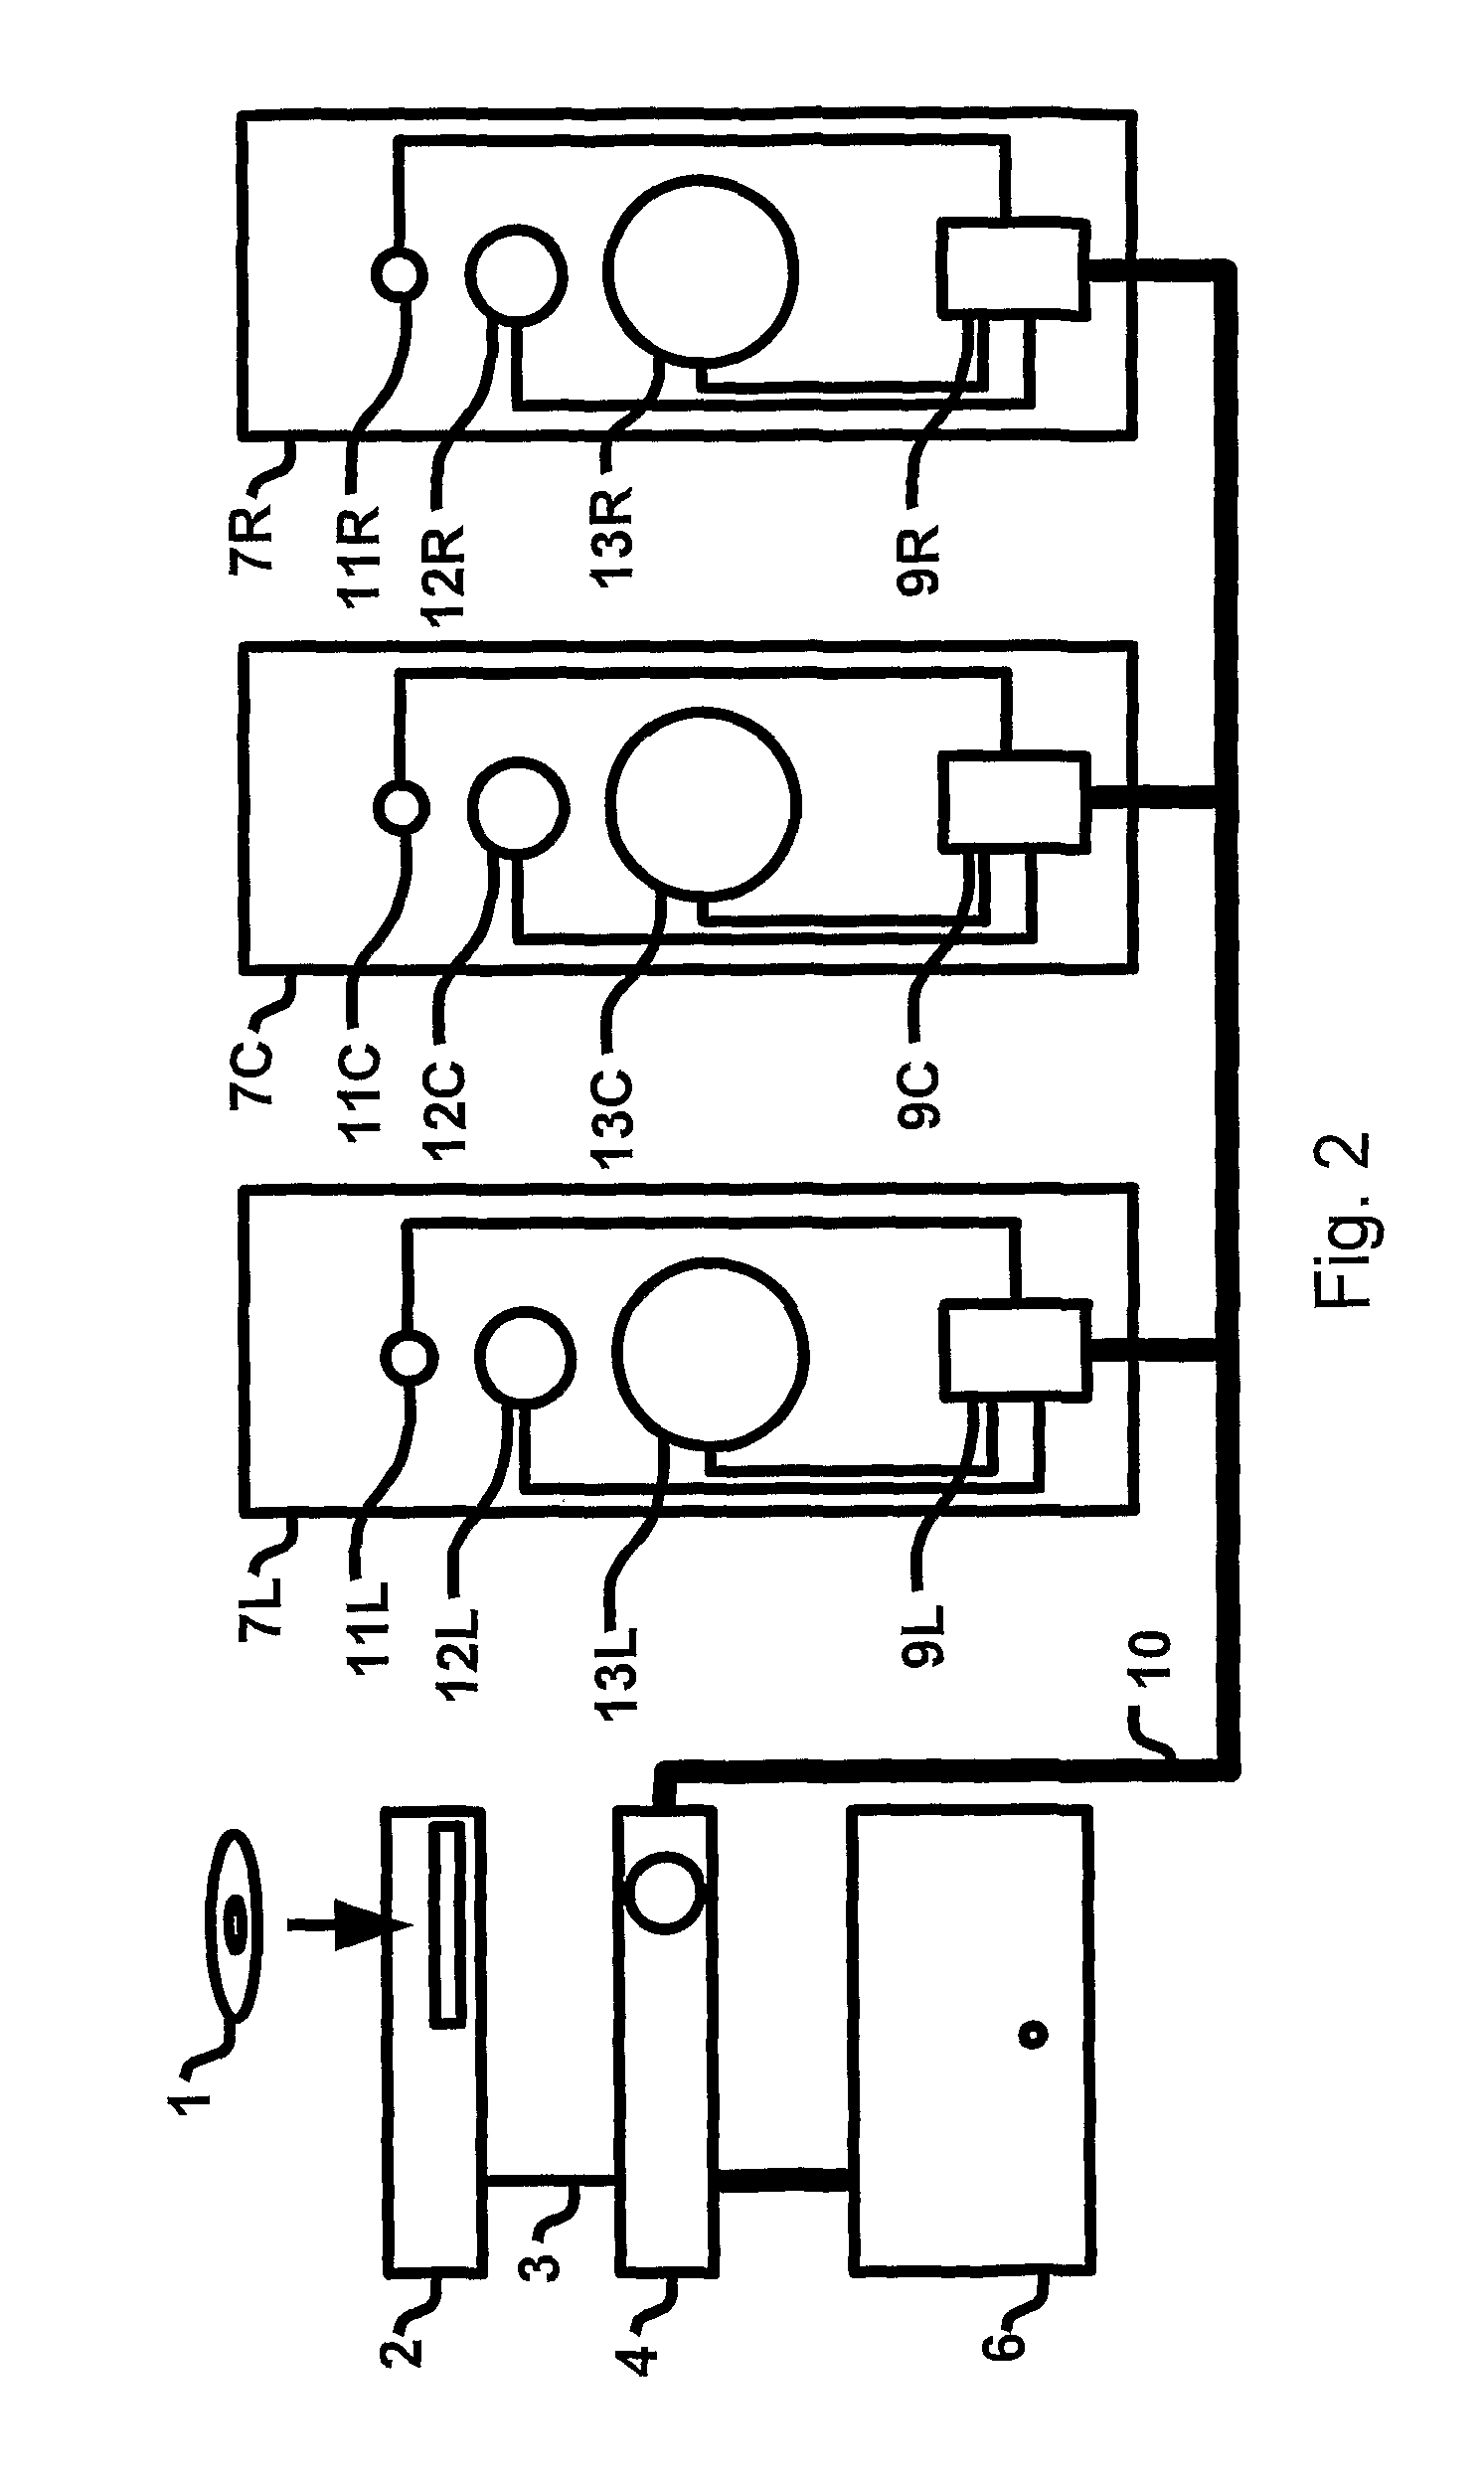 Sound reproducing system with superimposed digital signal